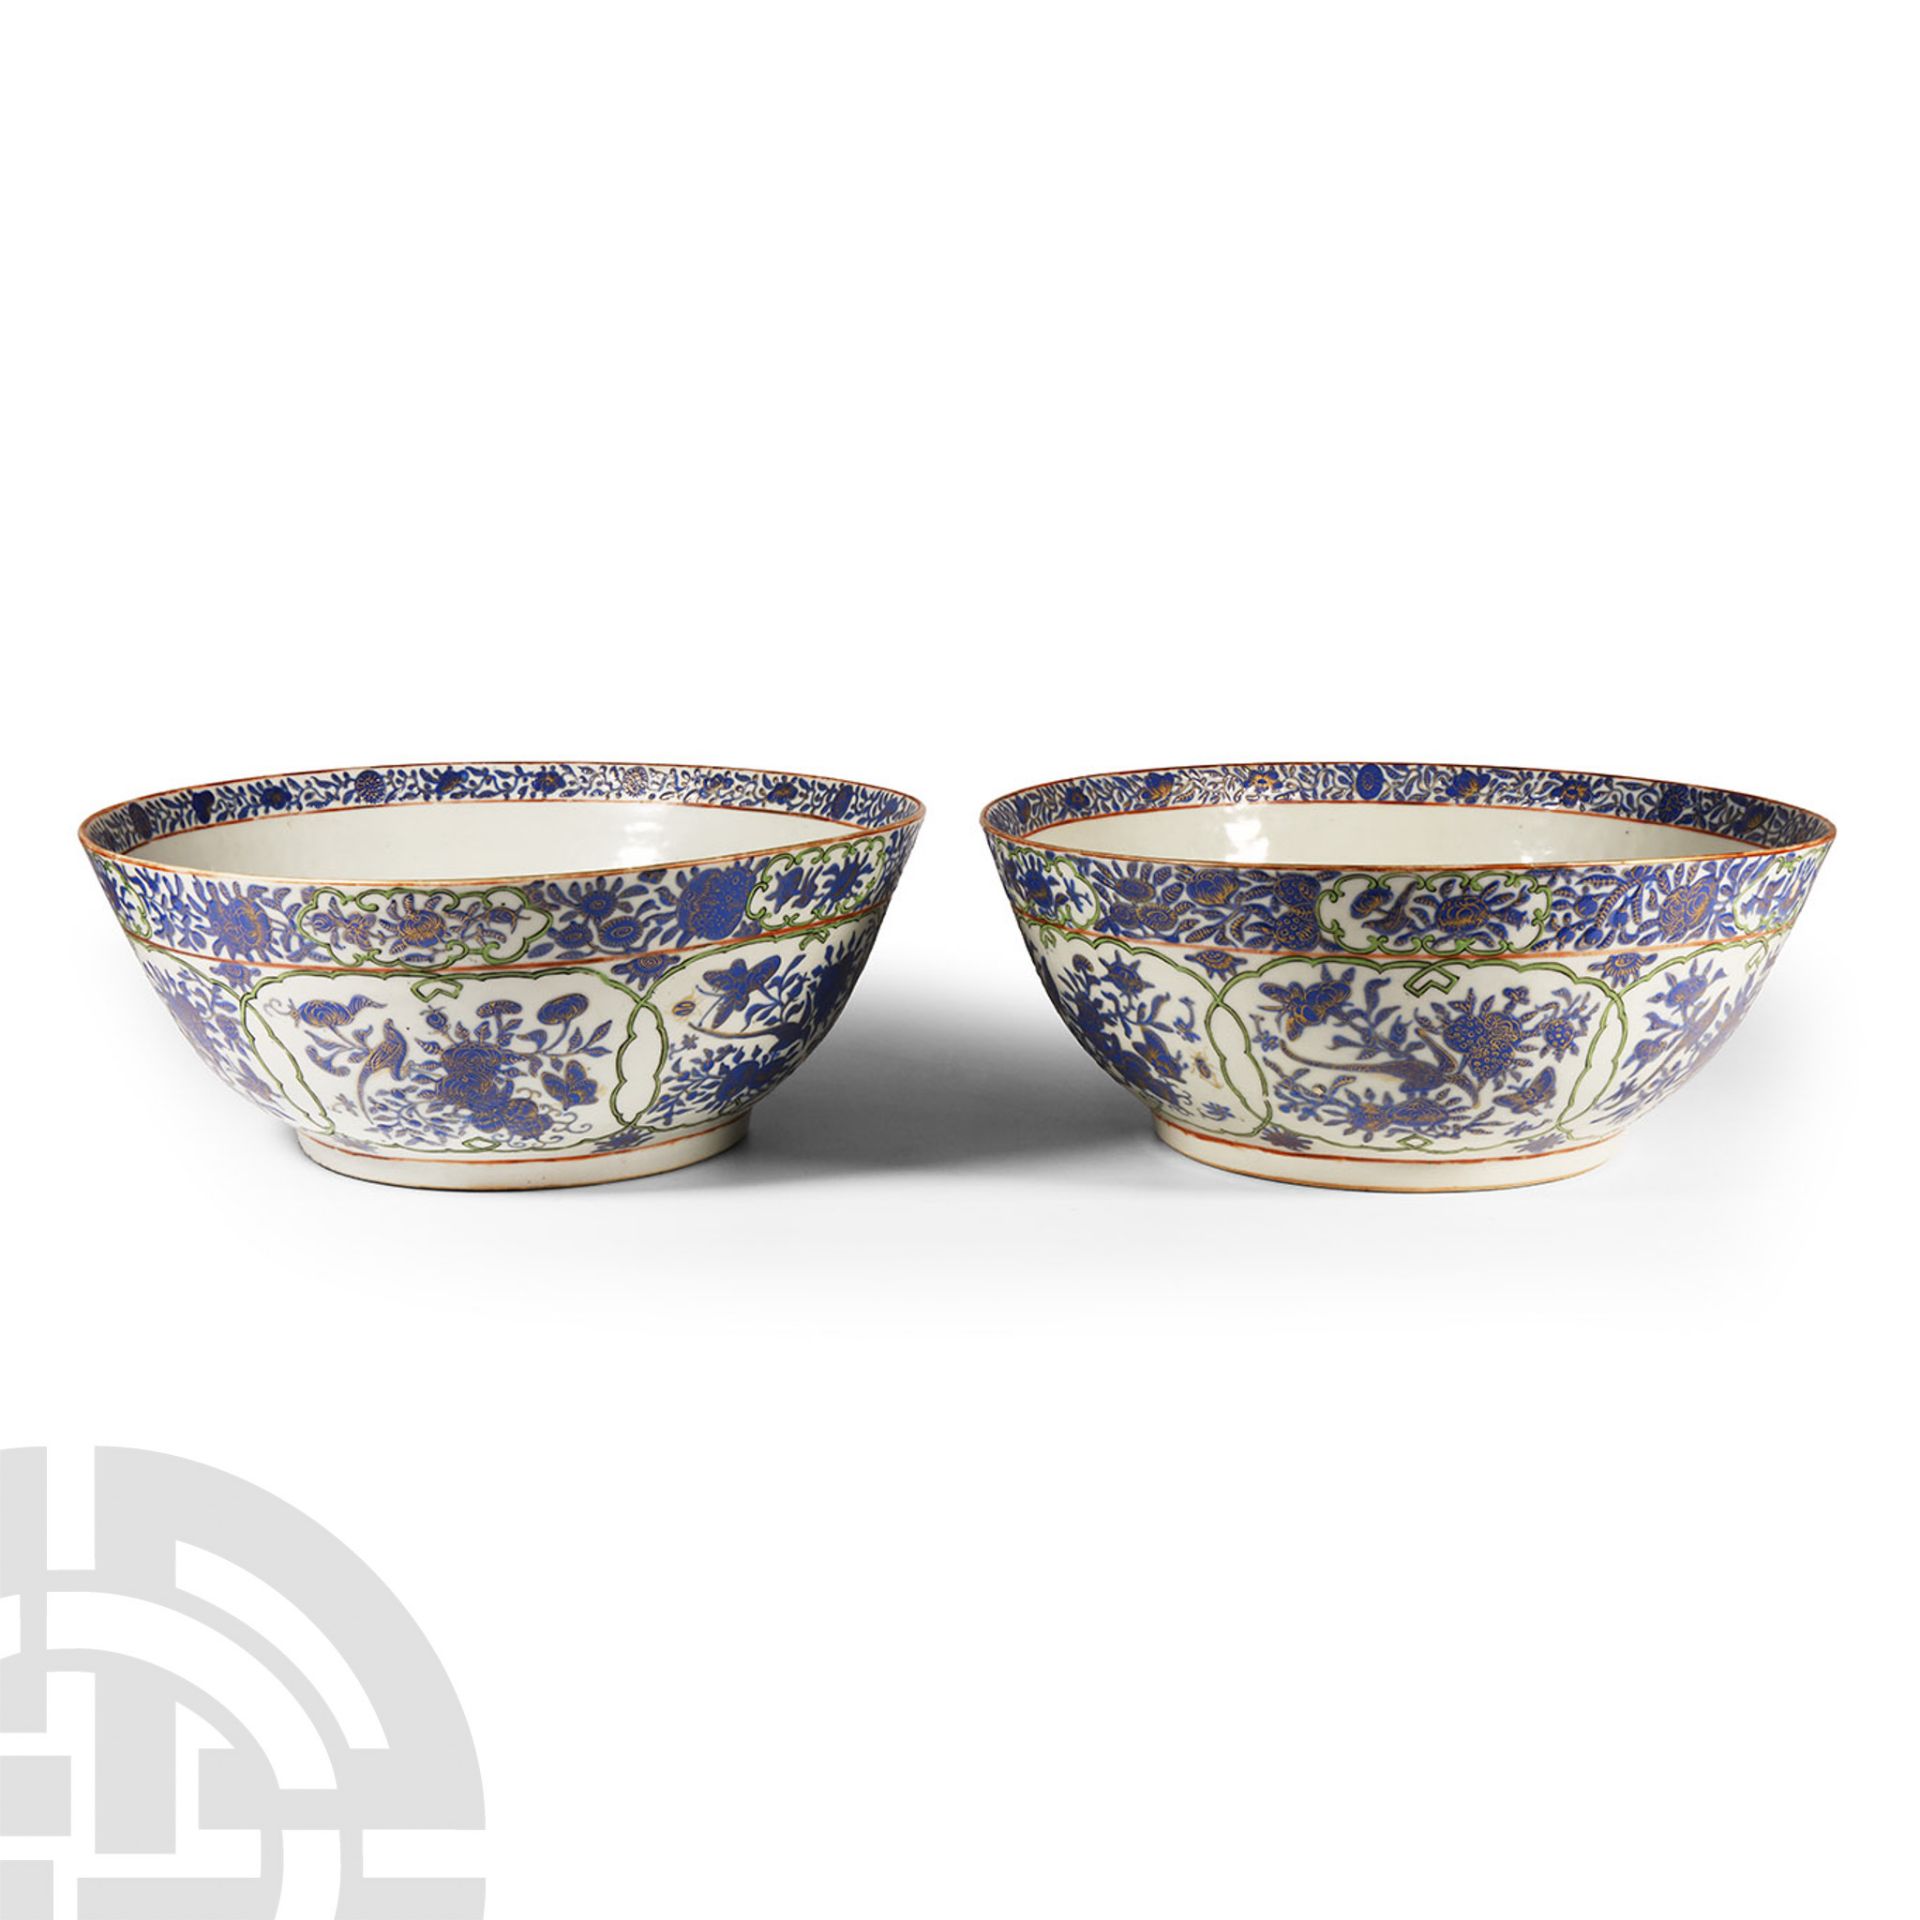 Large Chinese Decorated Porcelain Bowl Pair